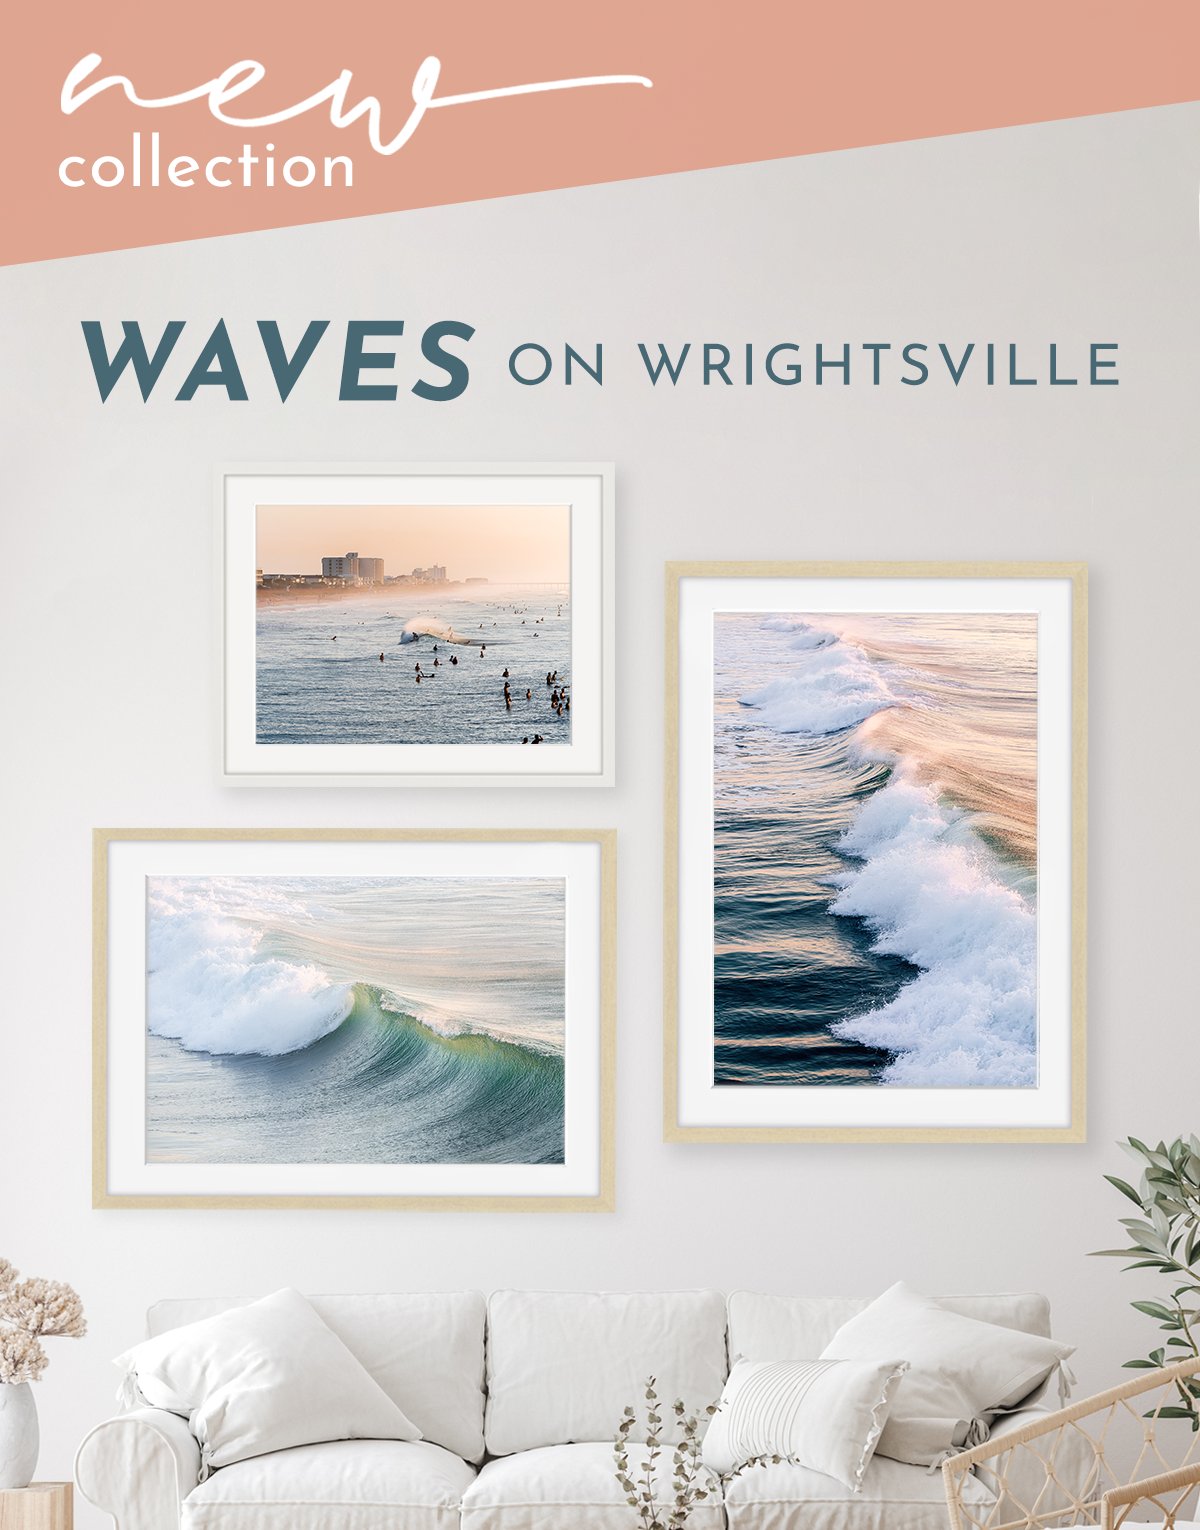 gallery wall featuring 3 framed photographs of waves on wrightsville beach